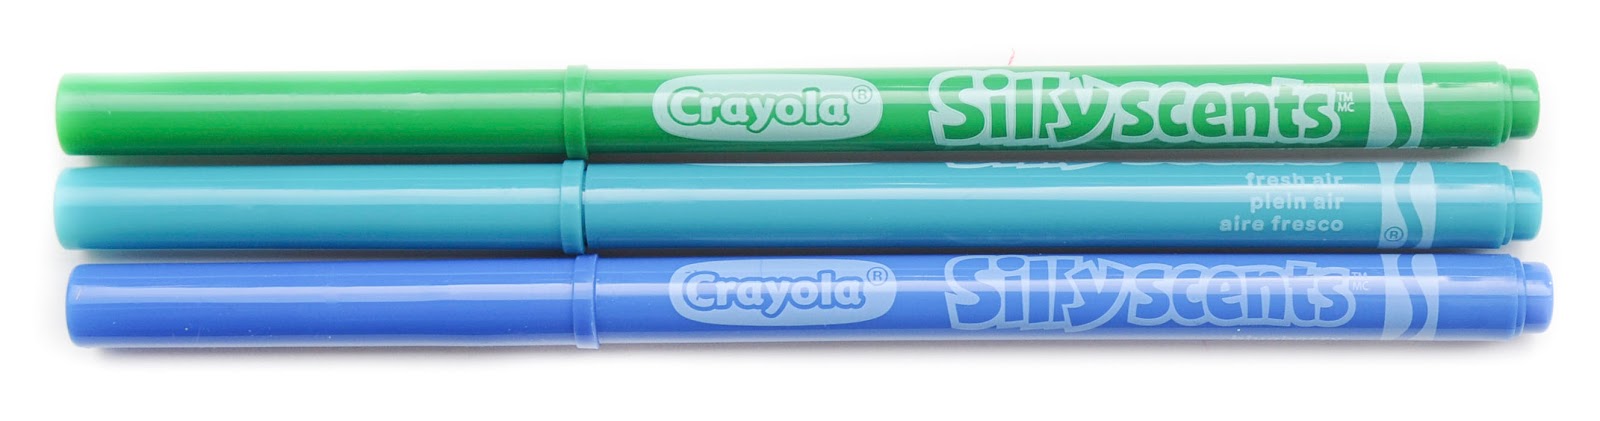 Crayola Silly Scents Sketch & Sniff Note Pad (Bubble Gum)